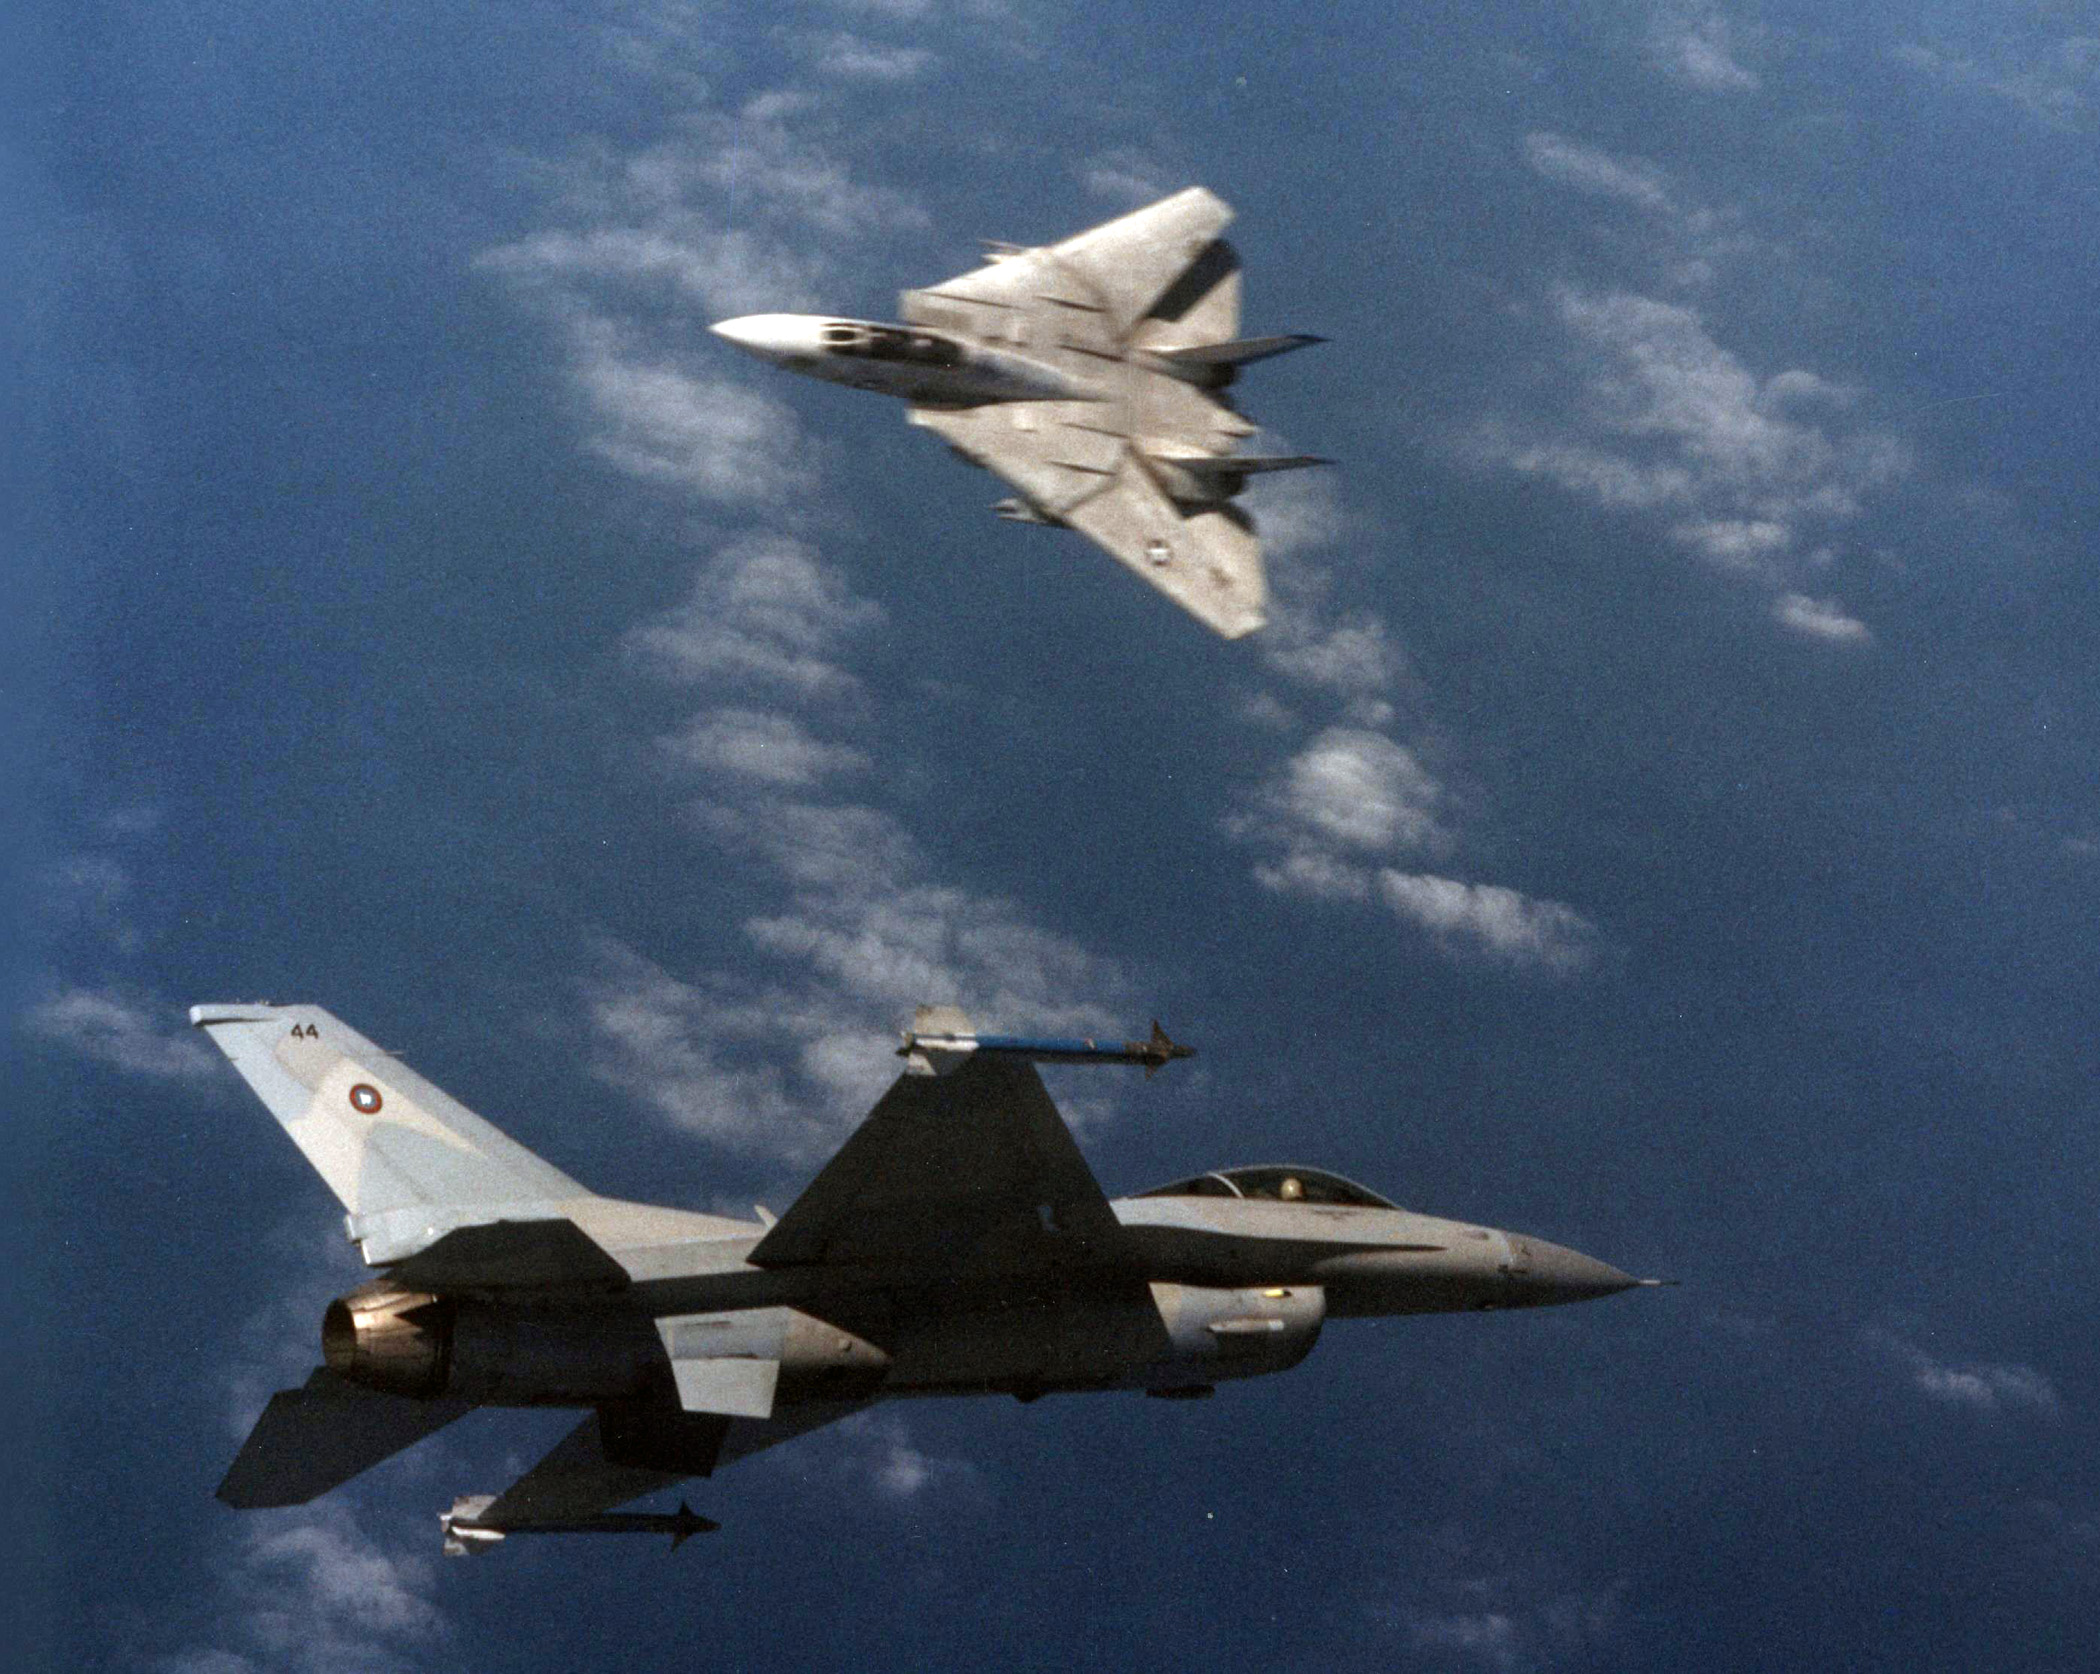 An F-14A Tomcat of Fighter Squadron (VF) 213 flown by CDR Greg "Mullet" Gerard and LTJG Don "Coach" Husten engages and F-16N Viper aggressor aircraft flown by Lieutenant Commander George "Elwood" Dom during training at the Navy Fighter Weapons School (TOPGUN) at Naval Air Station (NAS) Miramar, California, in March 1989. Later in his career, Dom served as flight leader of the Blue Angels. (Robert L. Lawson Photograph Collection, National Naval Aviation Museum)